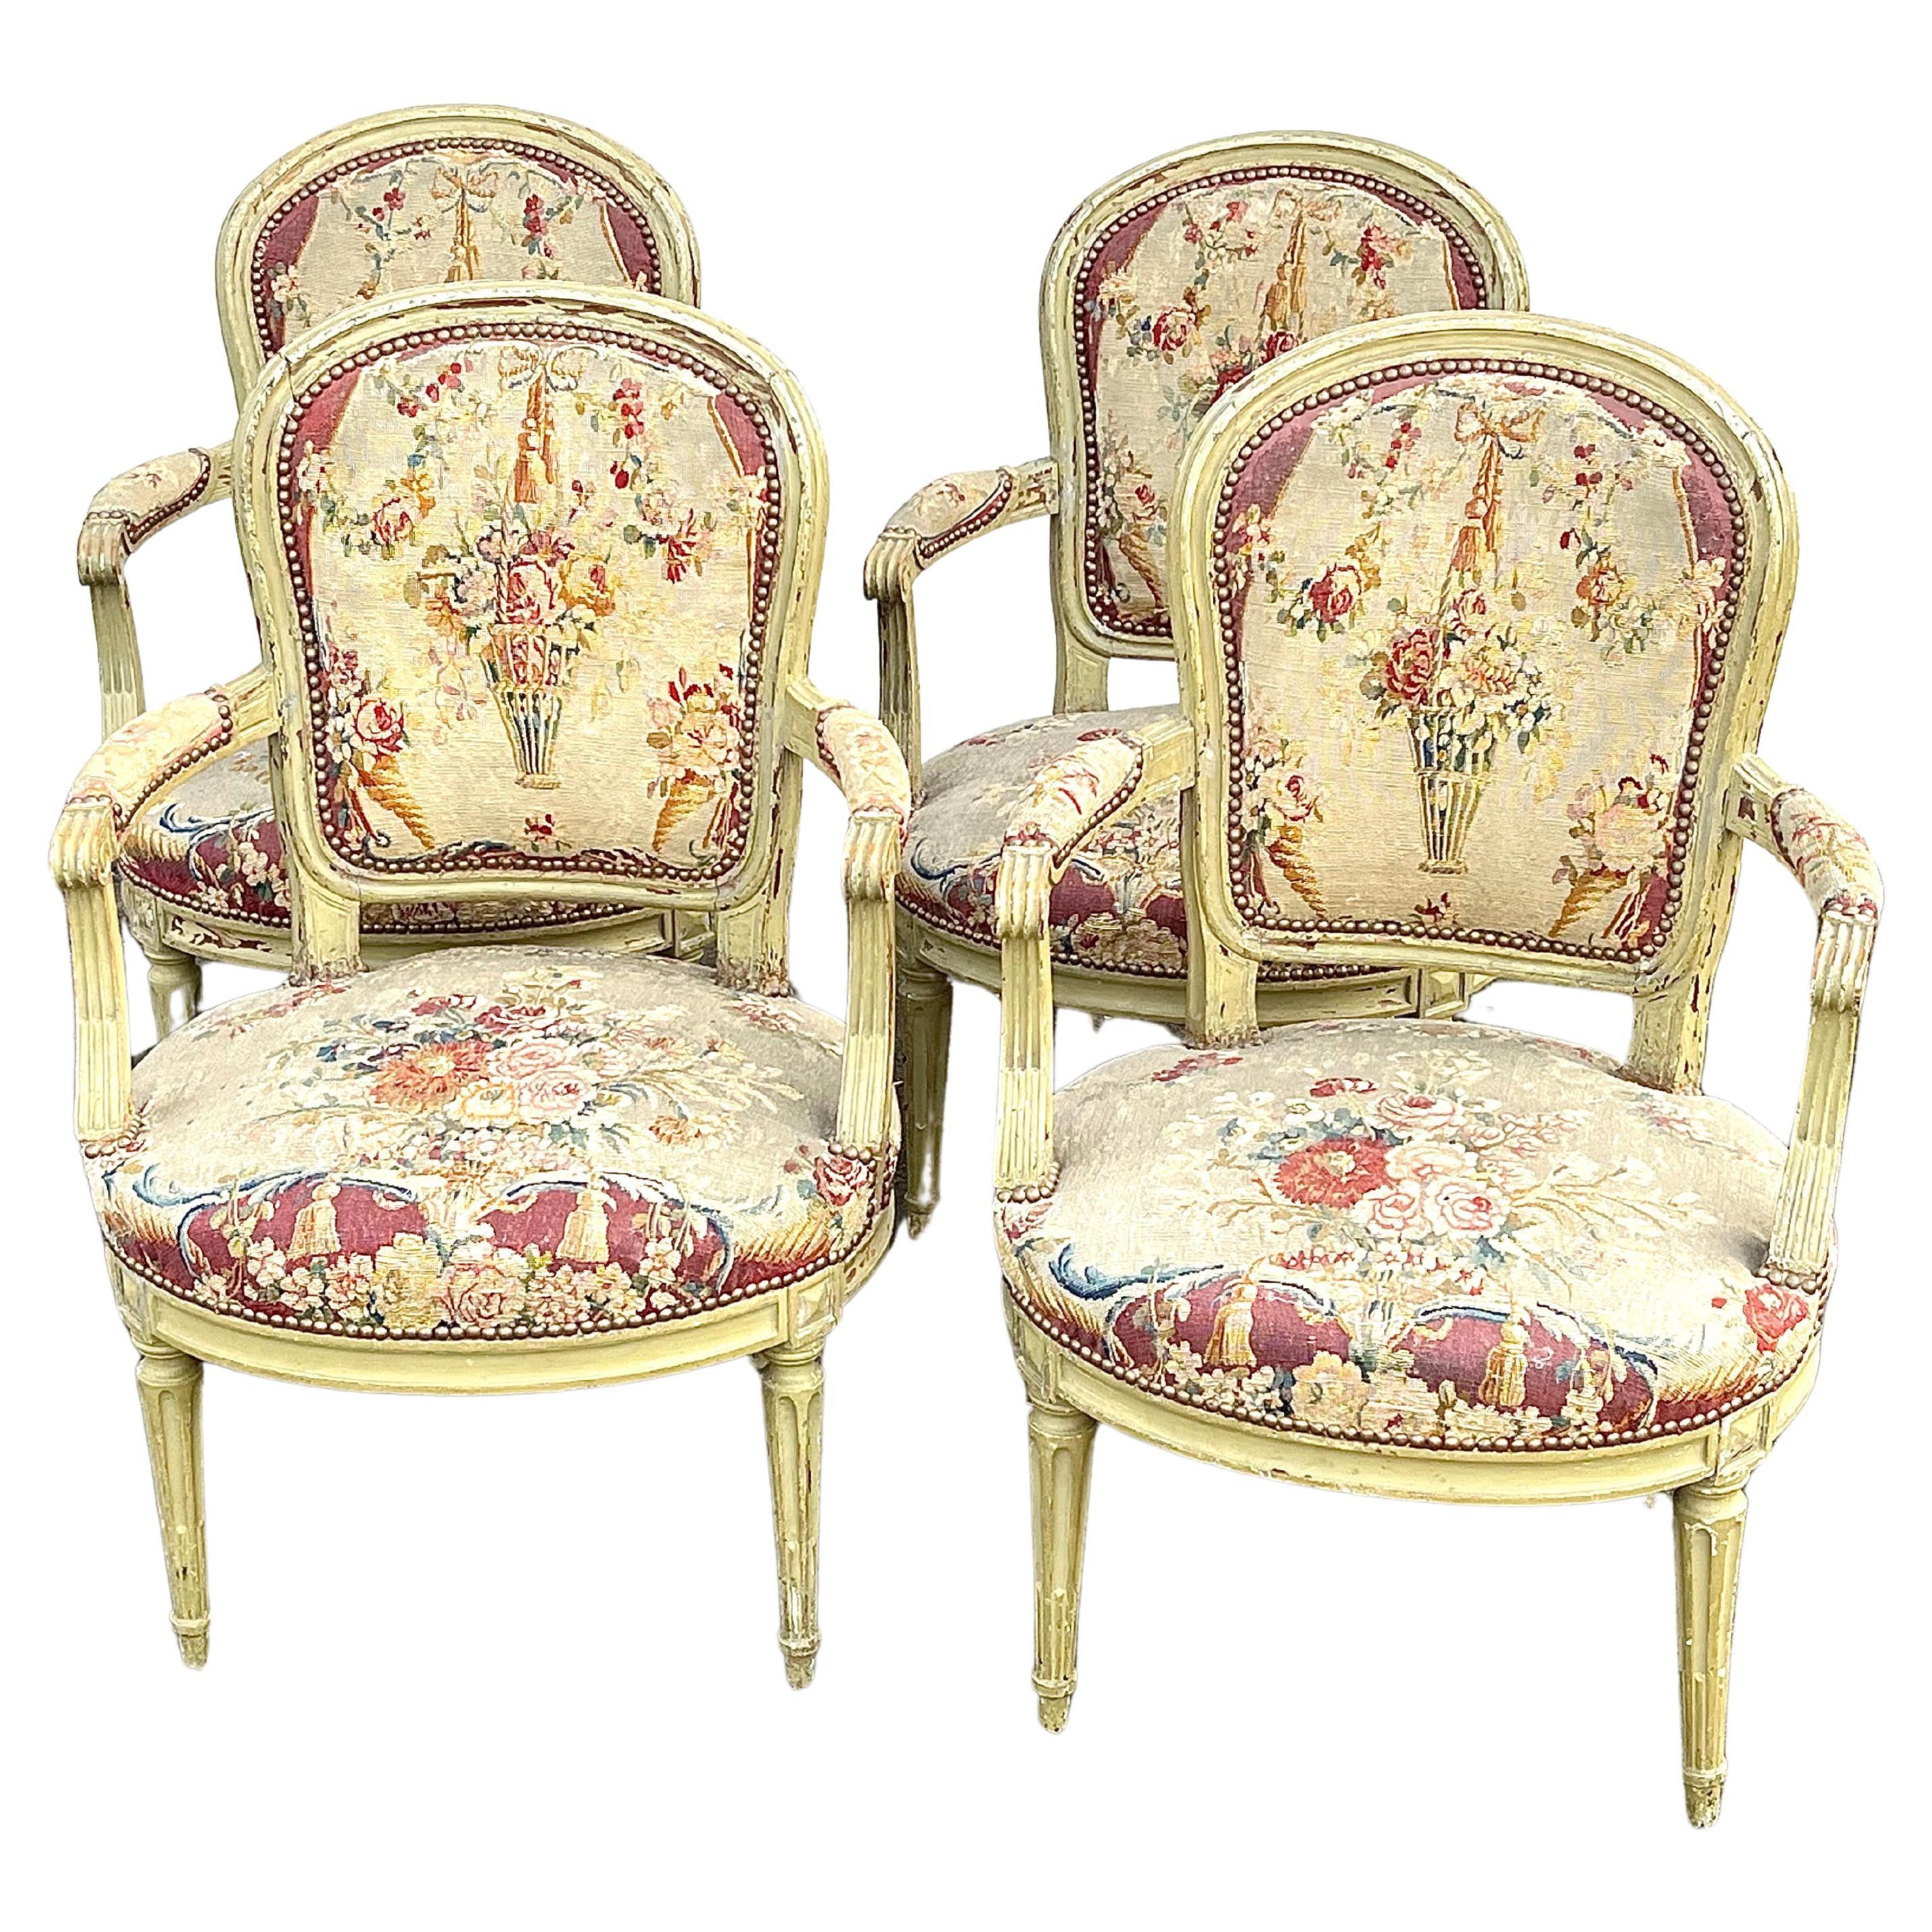 A set of 4 Louis XVI period fauteuils in original green painted finish, with 18th century needlepoint tapestry seats and backs, each chair signed by the maker on the seat stretcher “F. LAPIERRE A LYON”.

Can be purchased in pairs for half the money.